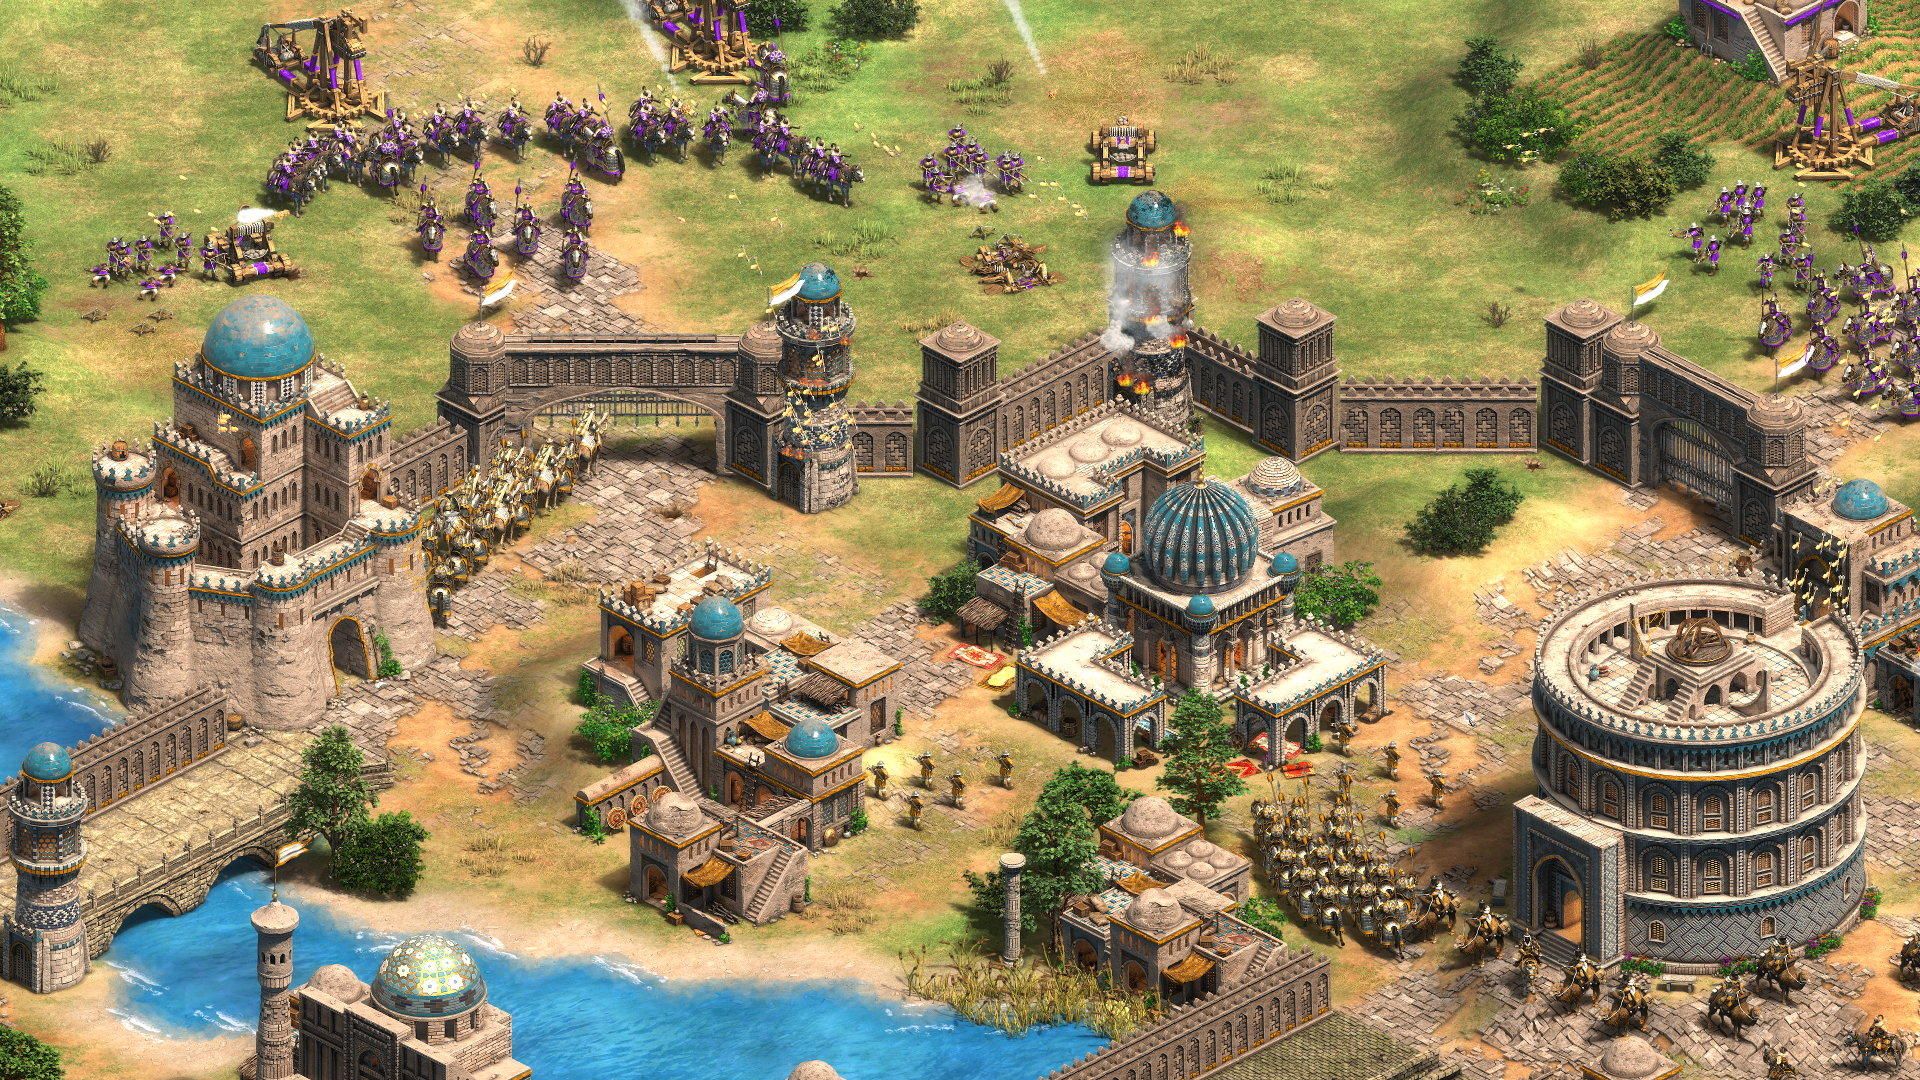 new age of empires 4